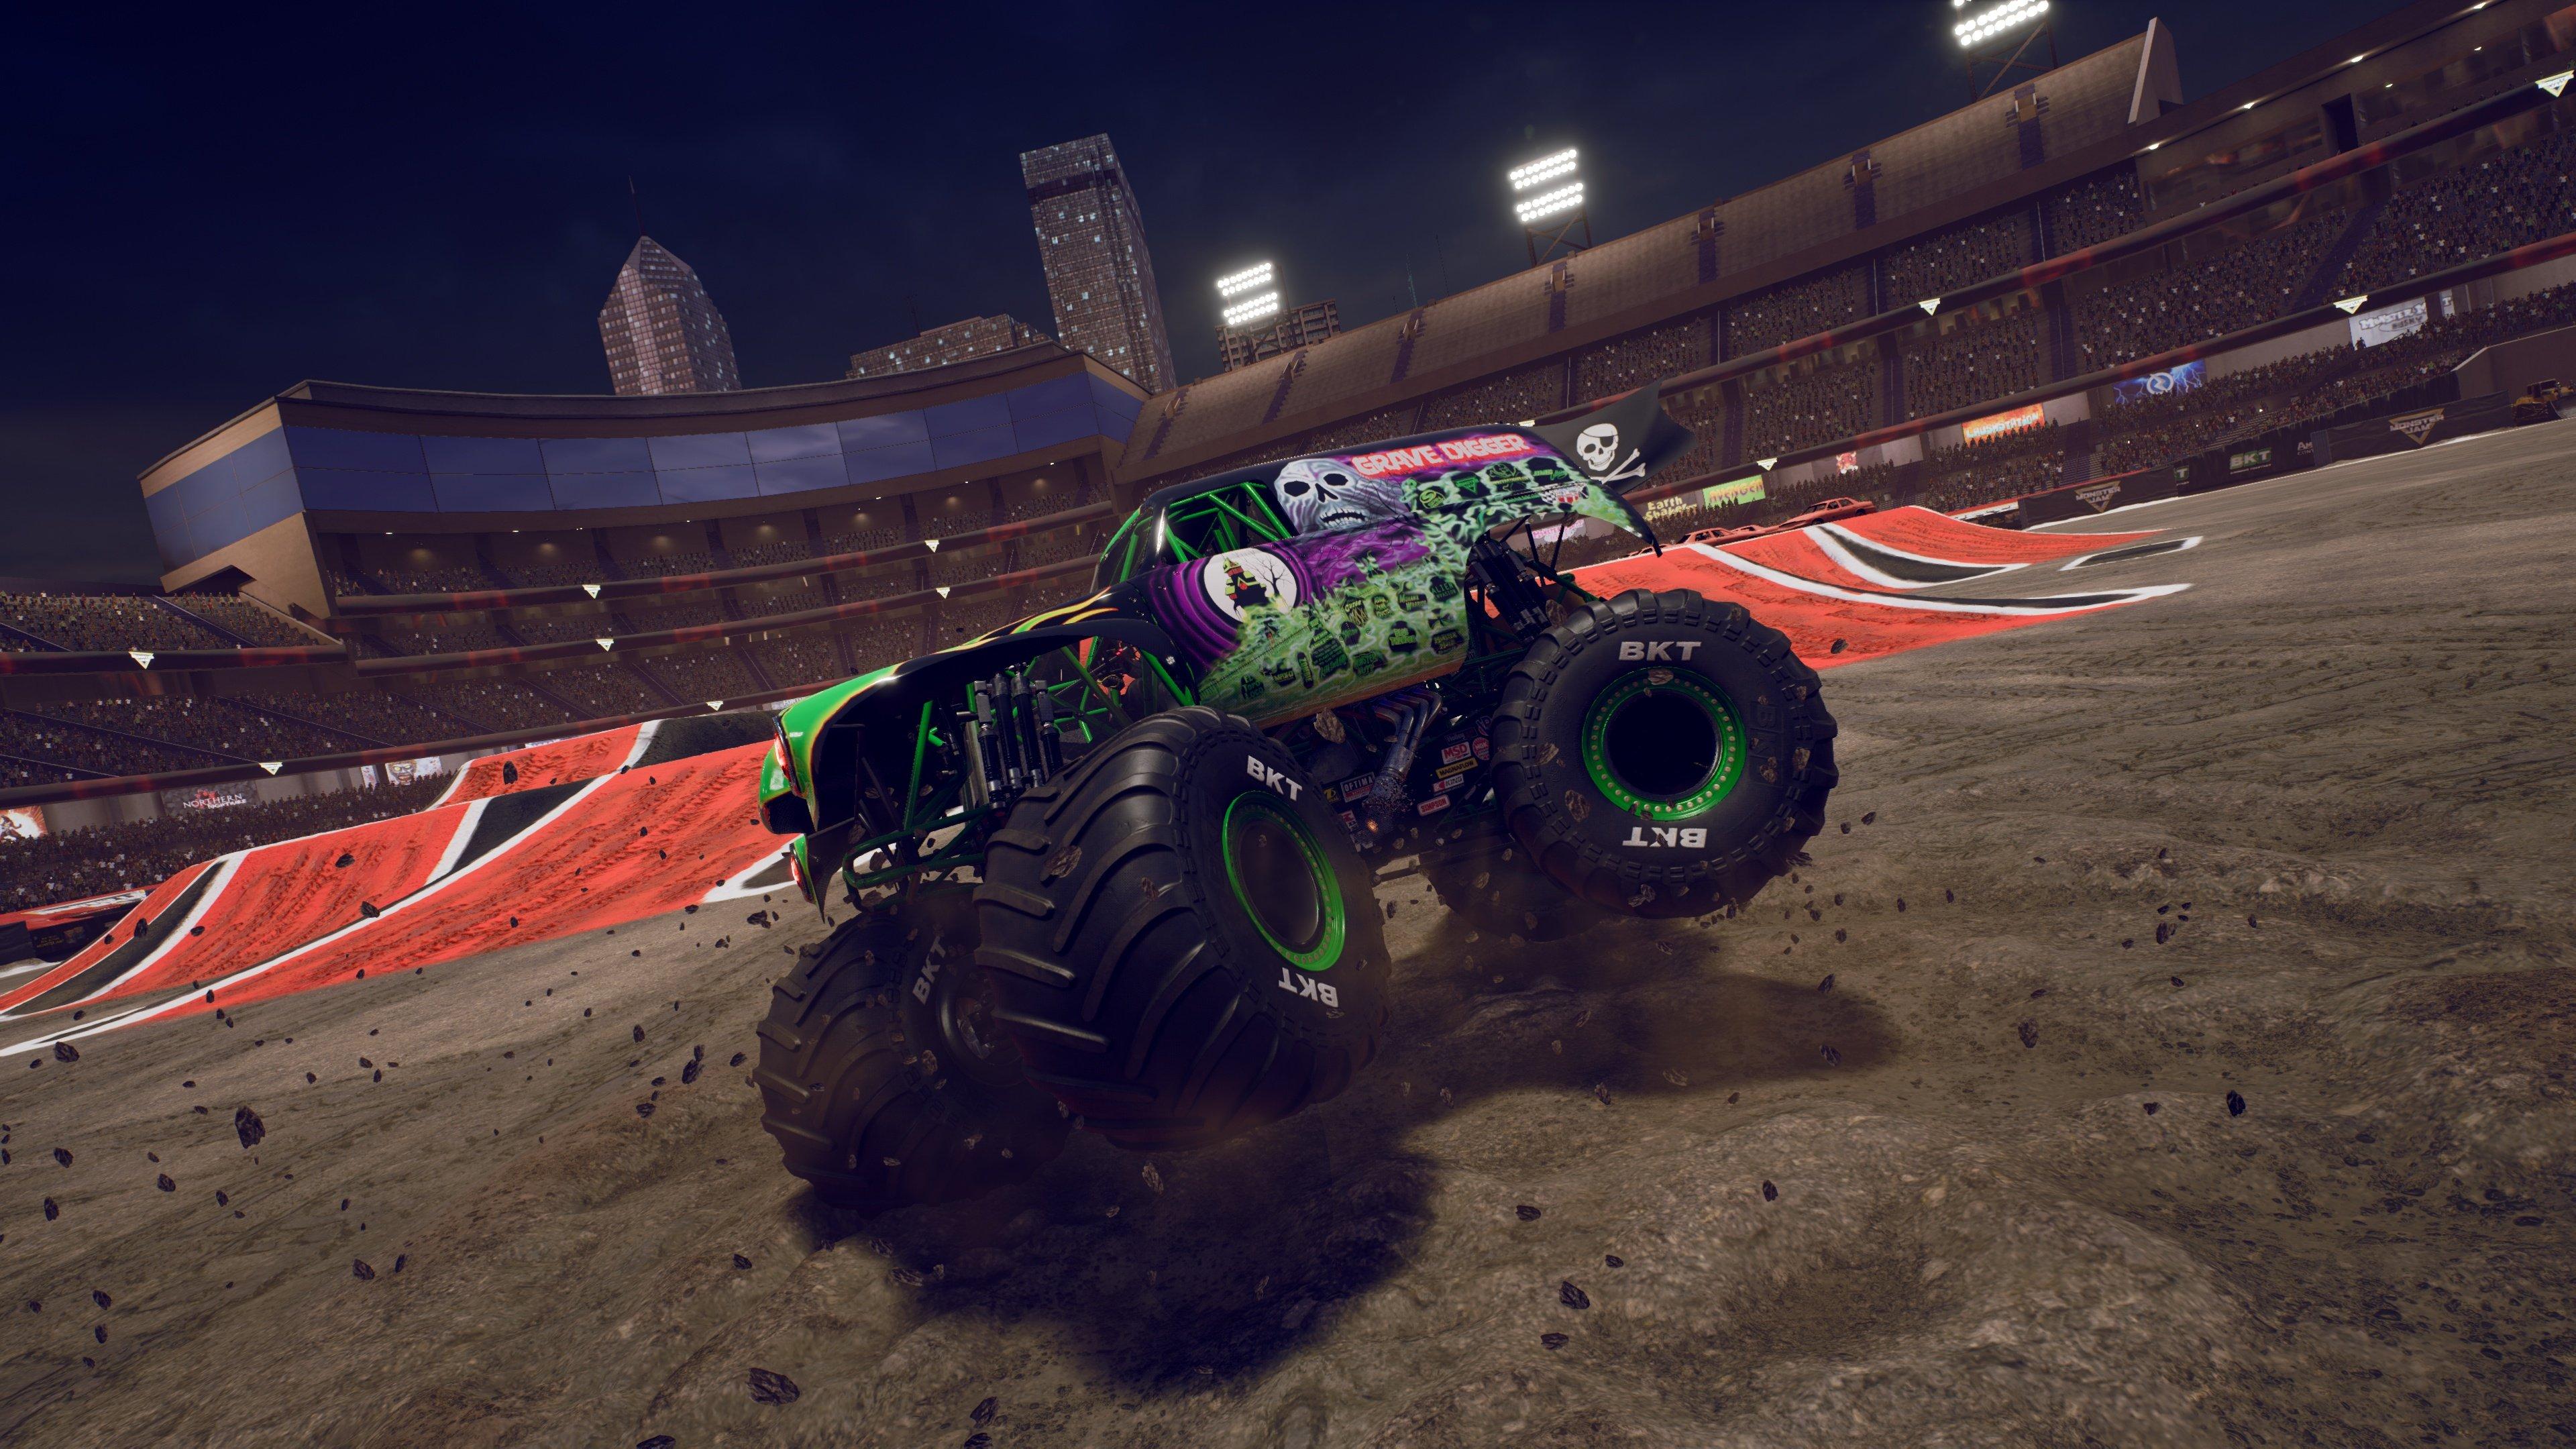 Monster Jam Steel Titans 2 Is Now Available For Xbox One And Xbox Series  X